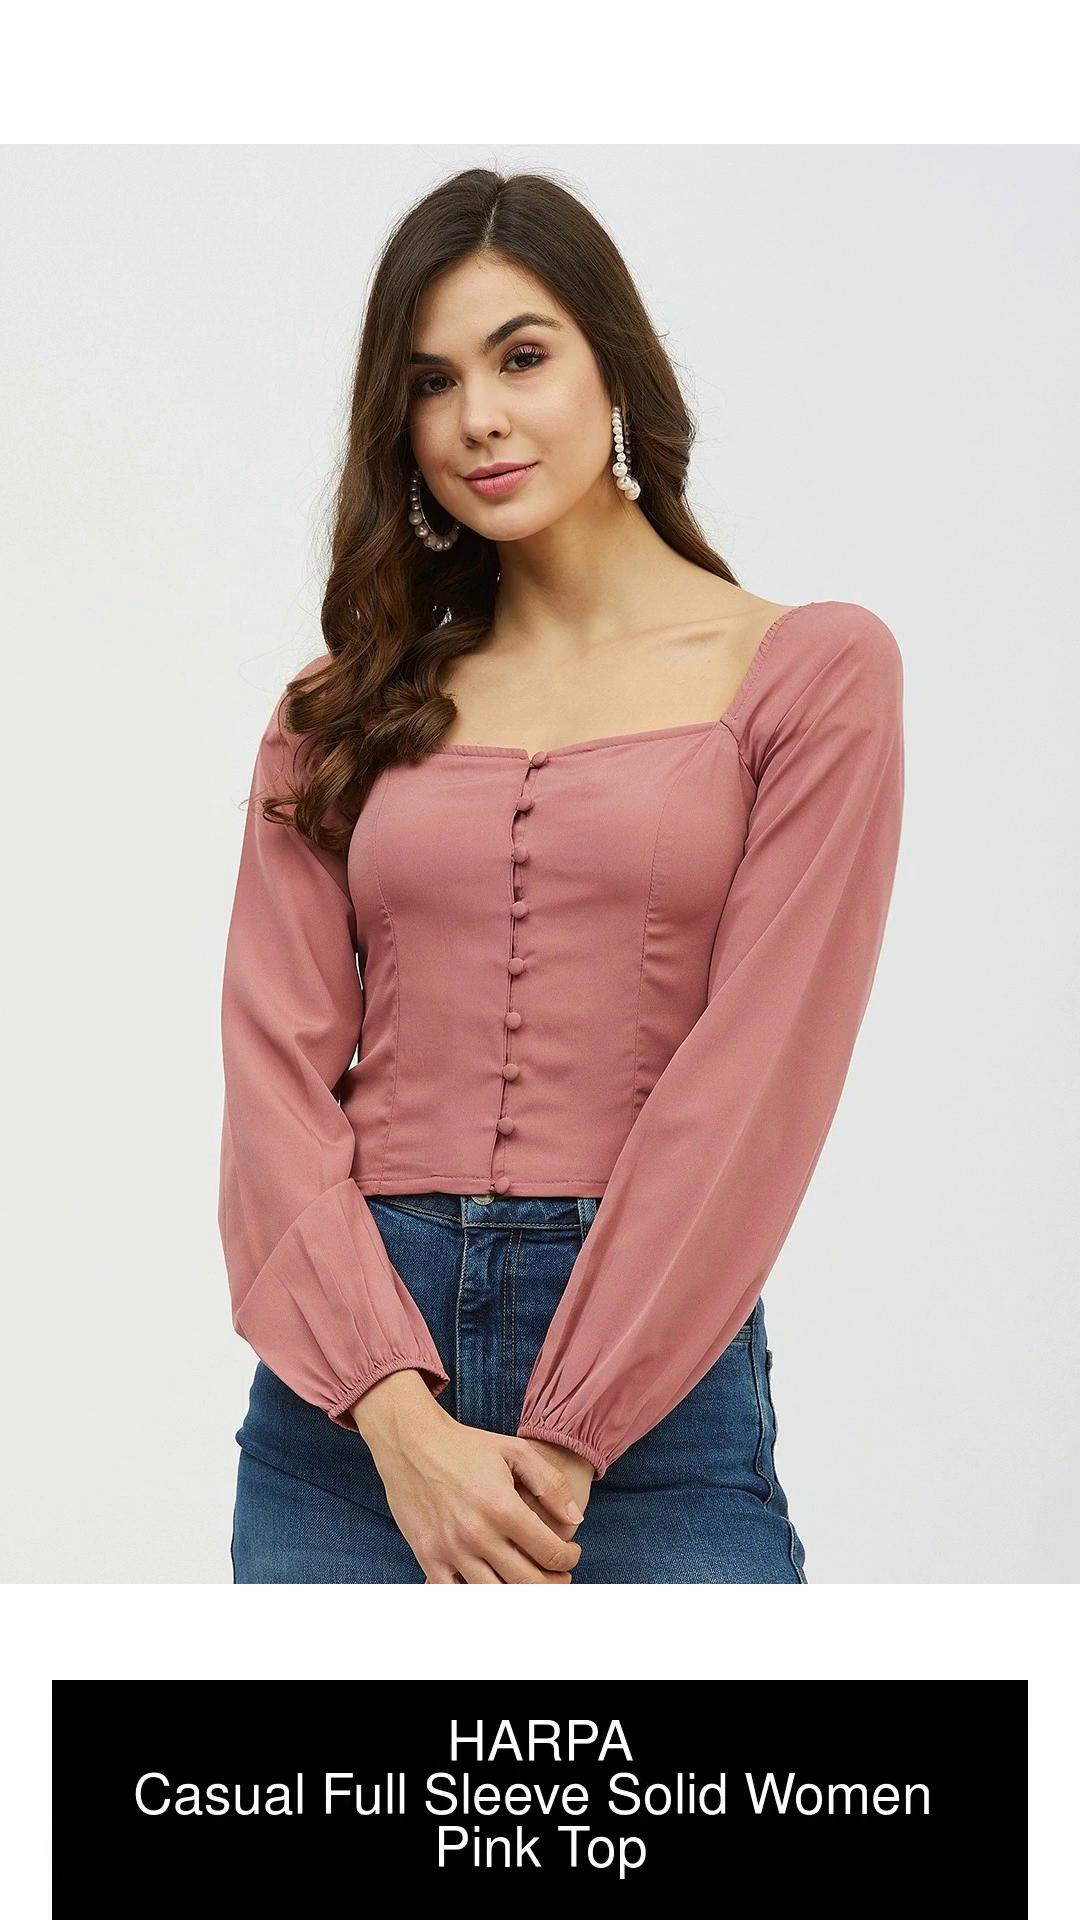 Buy HARPA Casual Full Sleeve Solid Women Pink Top Online at